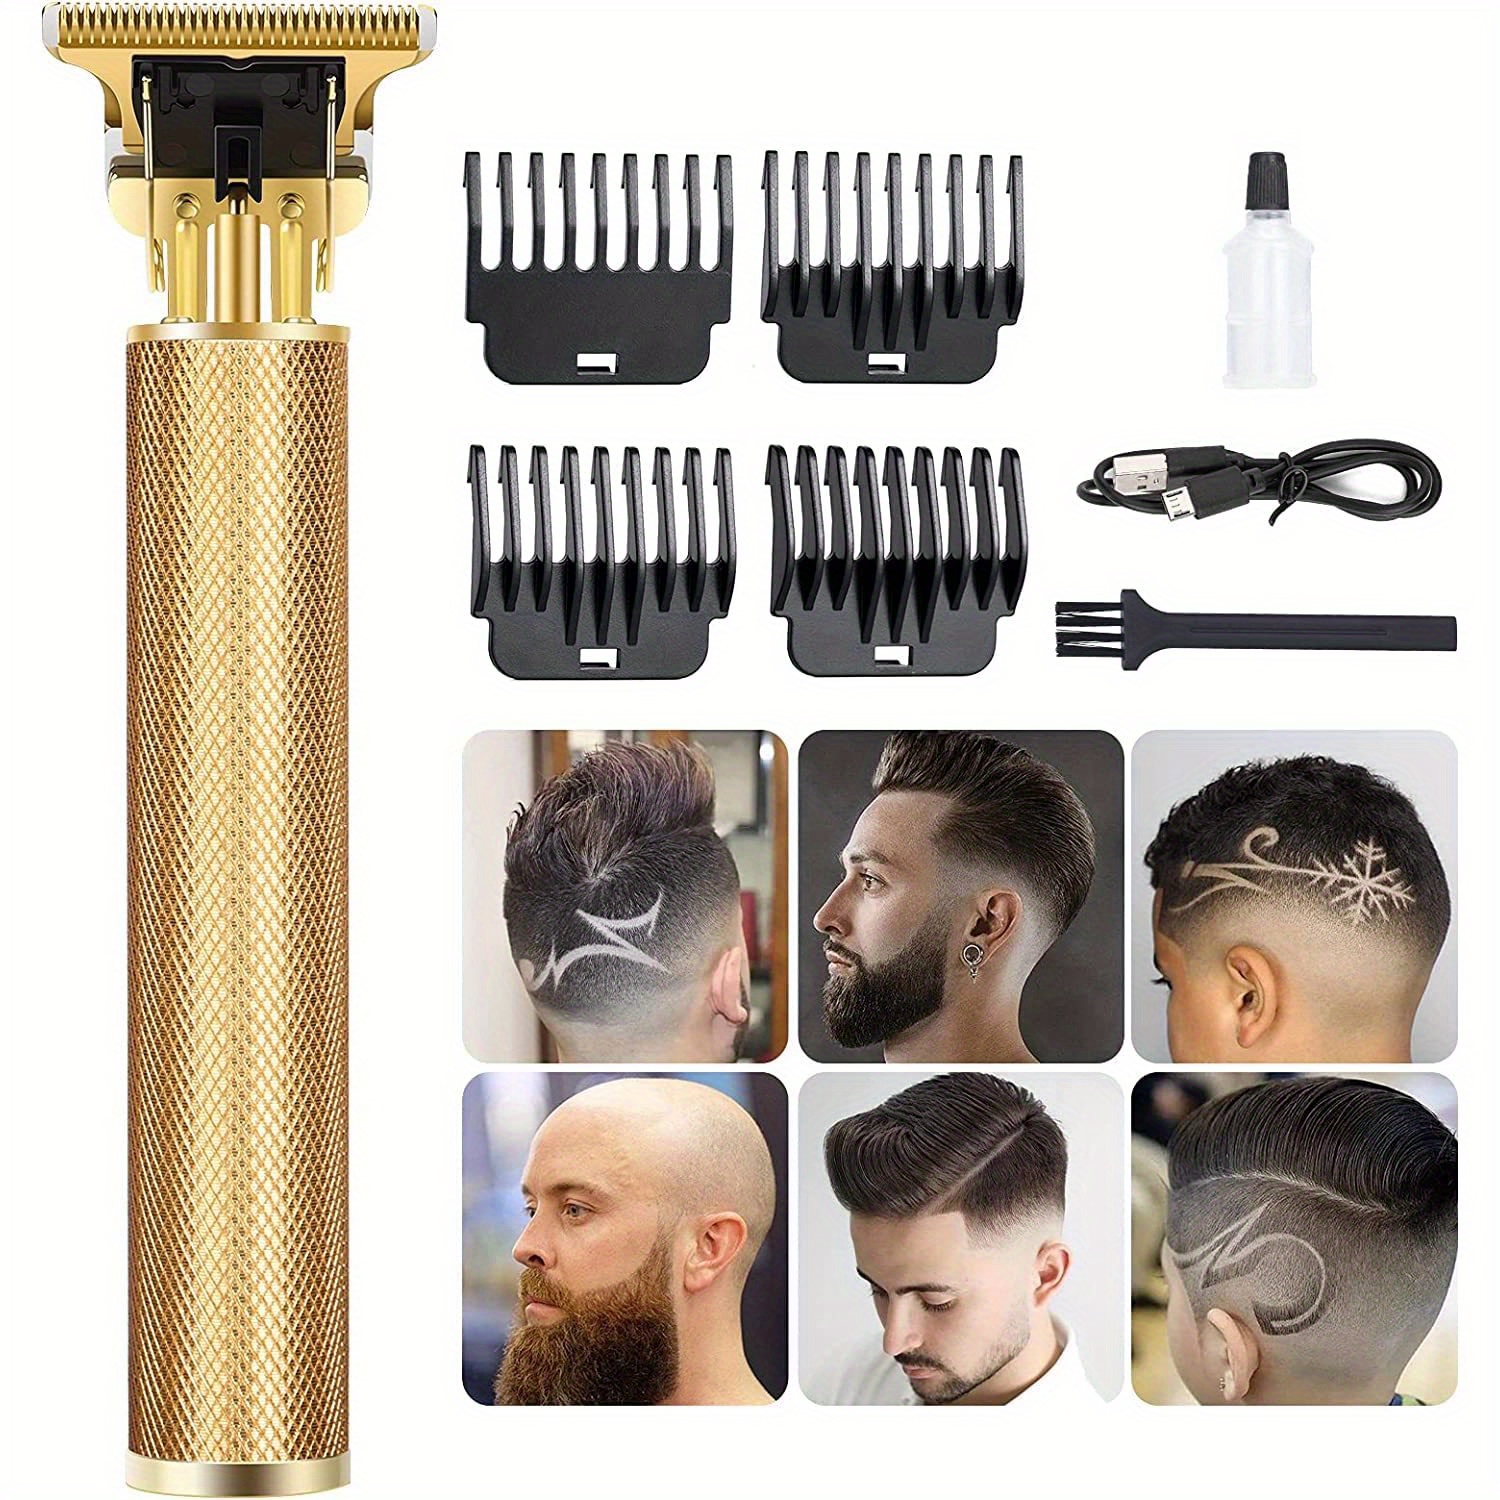 

Professional Hair Trimmer Electric Beard Shaver Body Hair Razor 3 Speed Barber Hair Razor With Hole